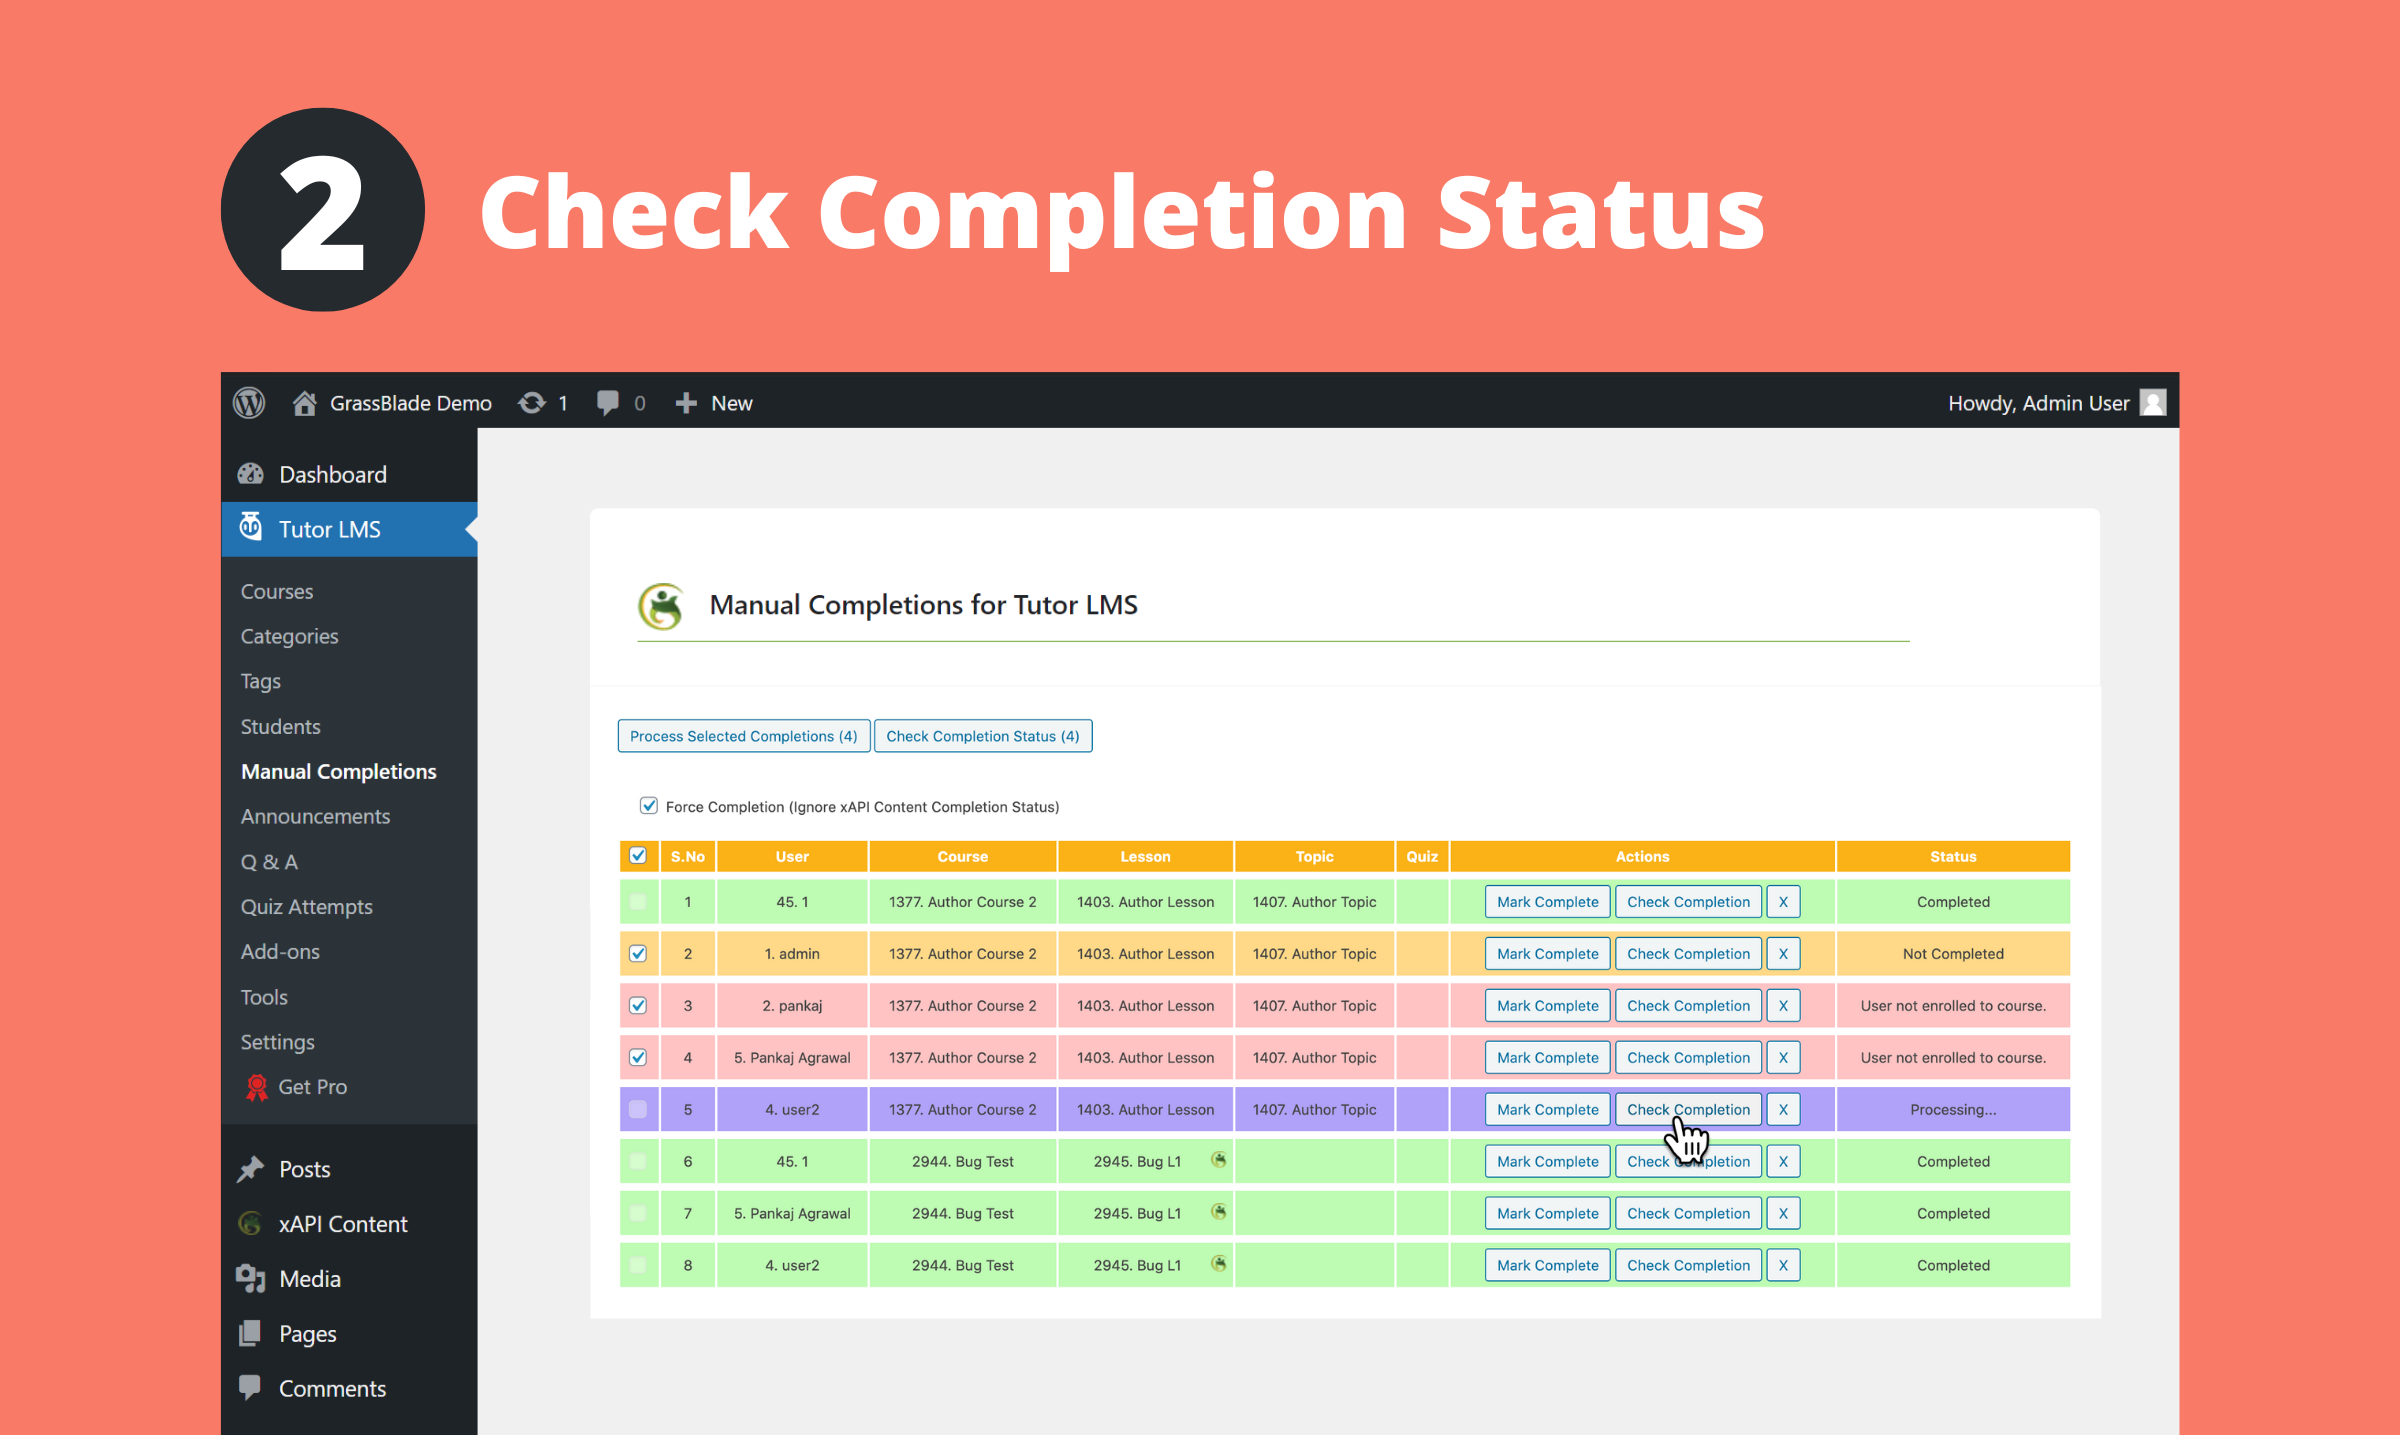 Checking Completion status